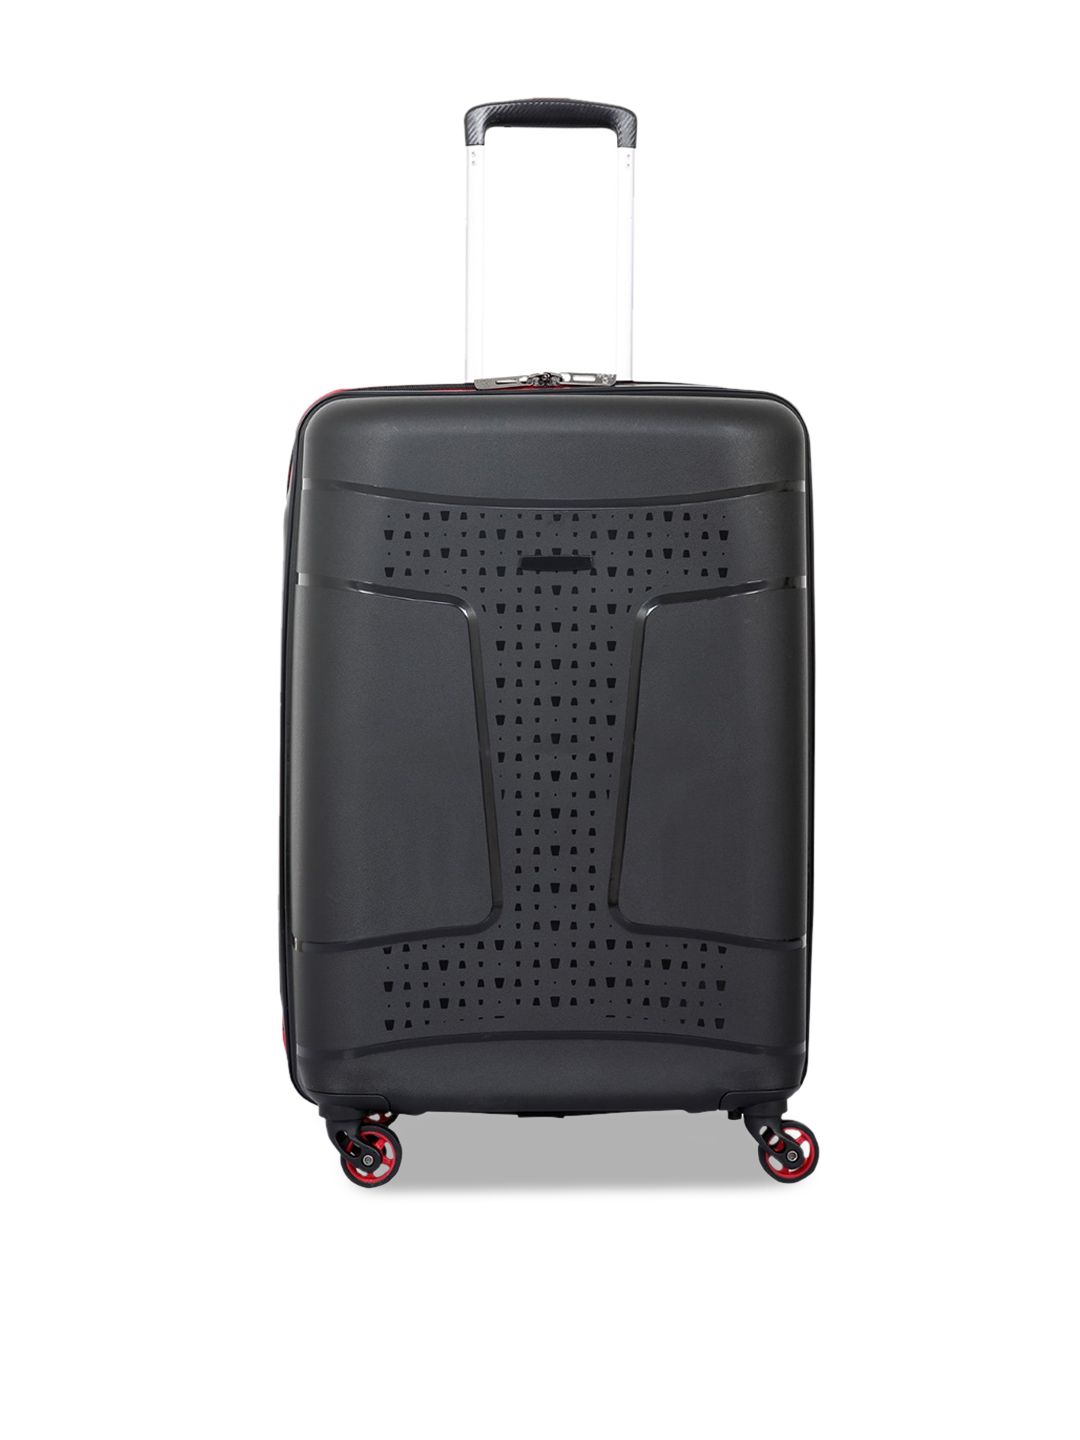 Polo Class Black Water Resistant Trolley Bags Price in India